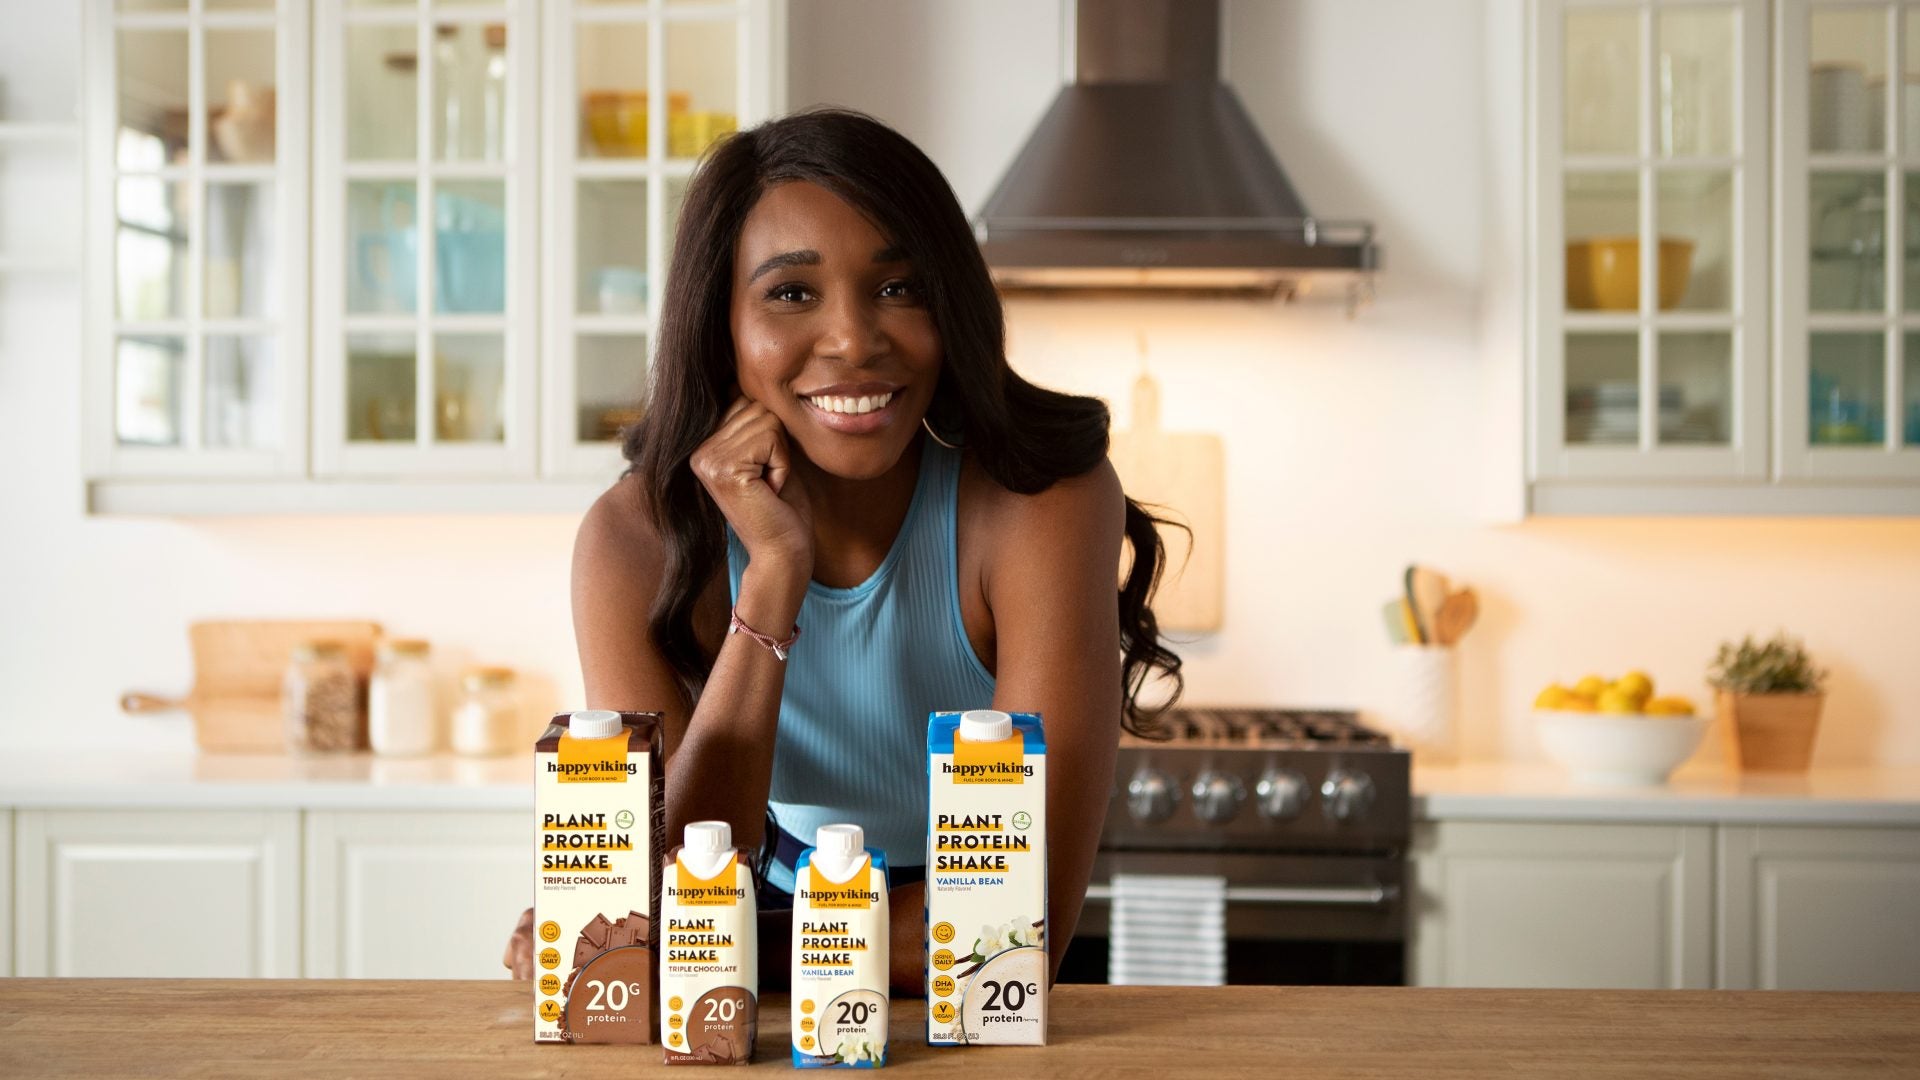 Venus Williams Launches New Vegan Protein Shakes, Shares Her Favorite Benefits of Plant-Based Living